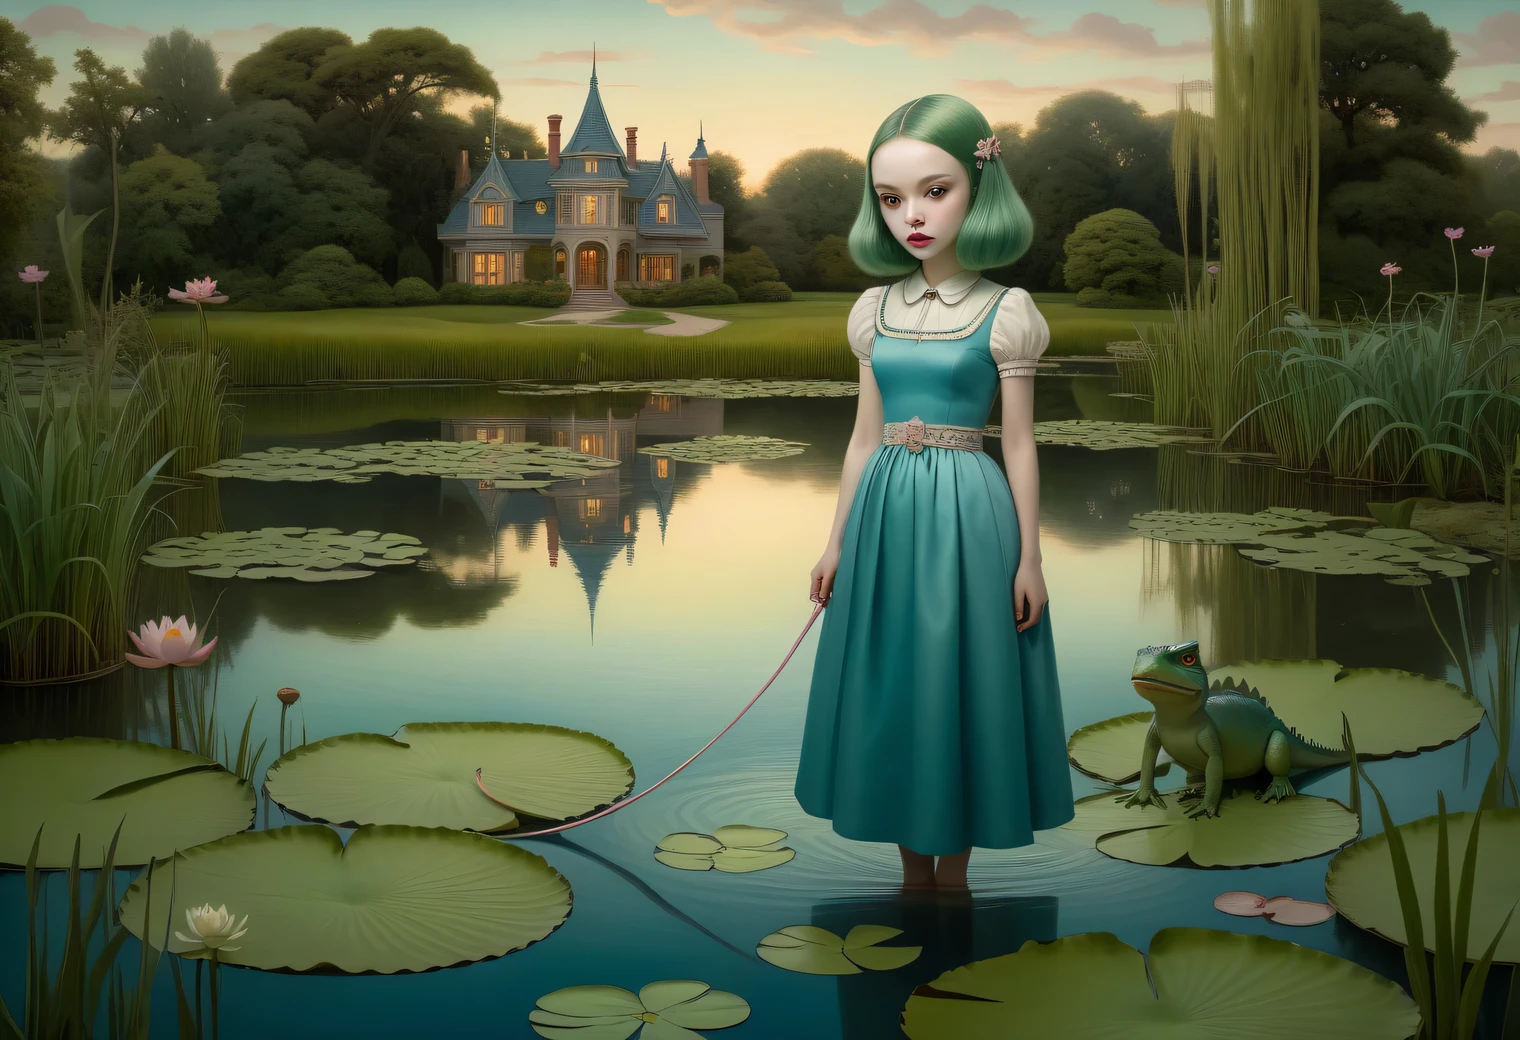 a painting on craft paper in the style of artist Mark Ryden, a strange alien anthropomorphic frog with long green hair in a blue dress stands on a sheet of evening pond water lilies, evening pond surface, water lilies and reeds, an alien anthropomorphic frog is shown in detail, evening pond, full compliance with the style of Mark Ryden, high resolution, Mark Ryden style page